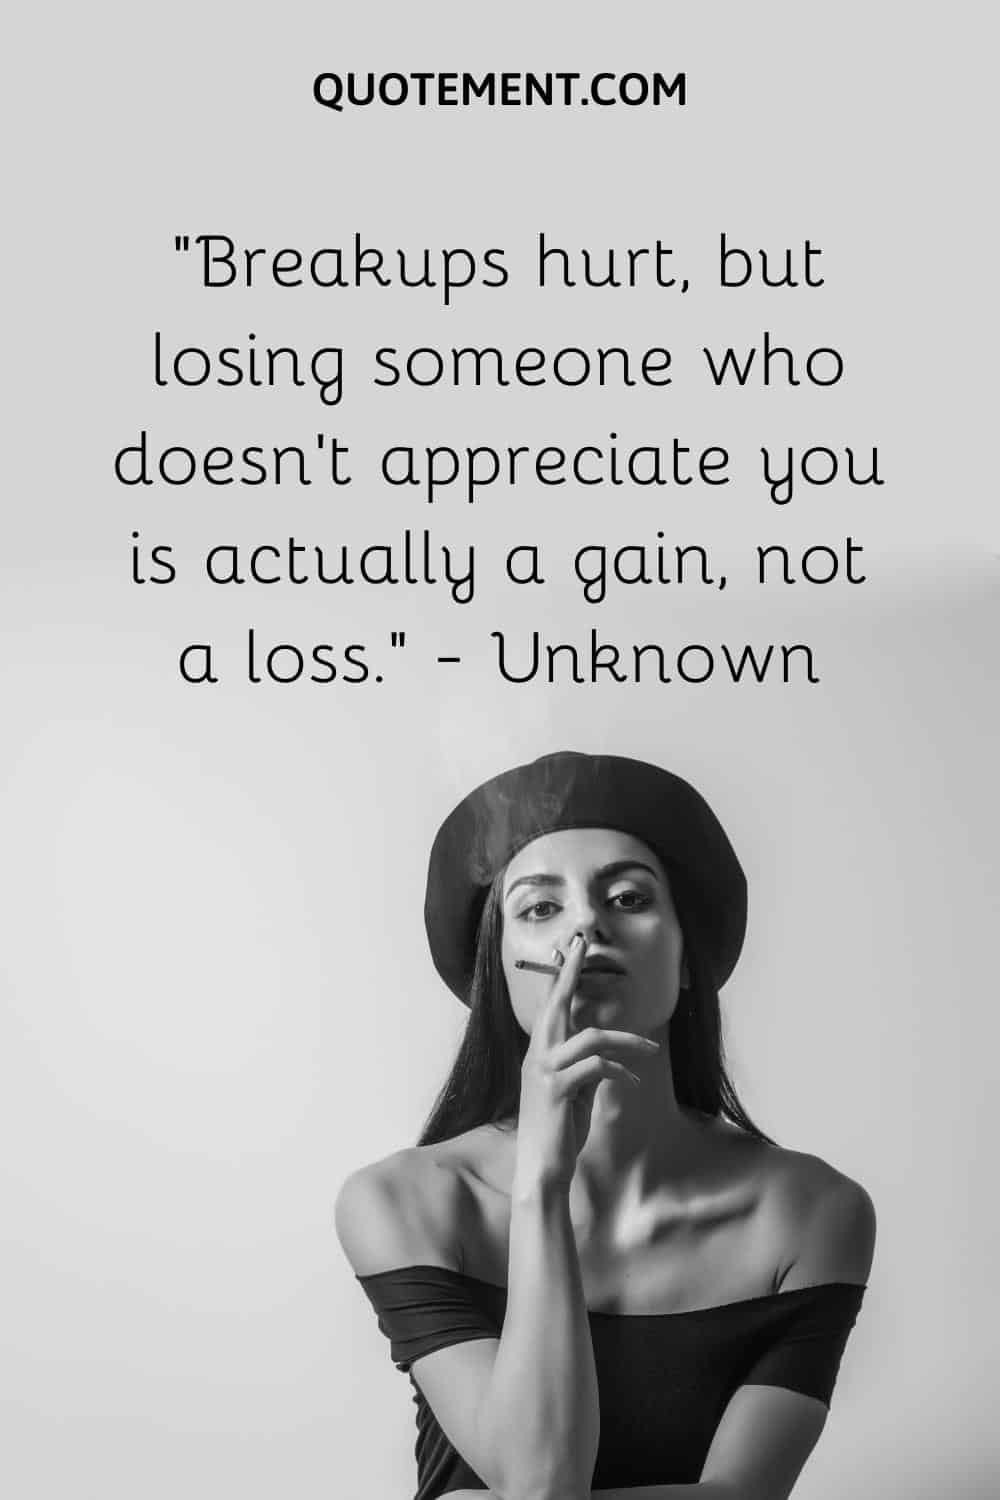 Breakups hurt, but losing someone who doesn't appreciate you is actually a gain, not a loss